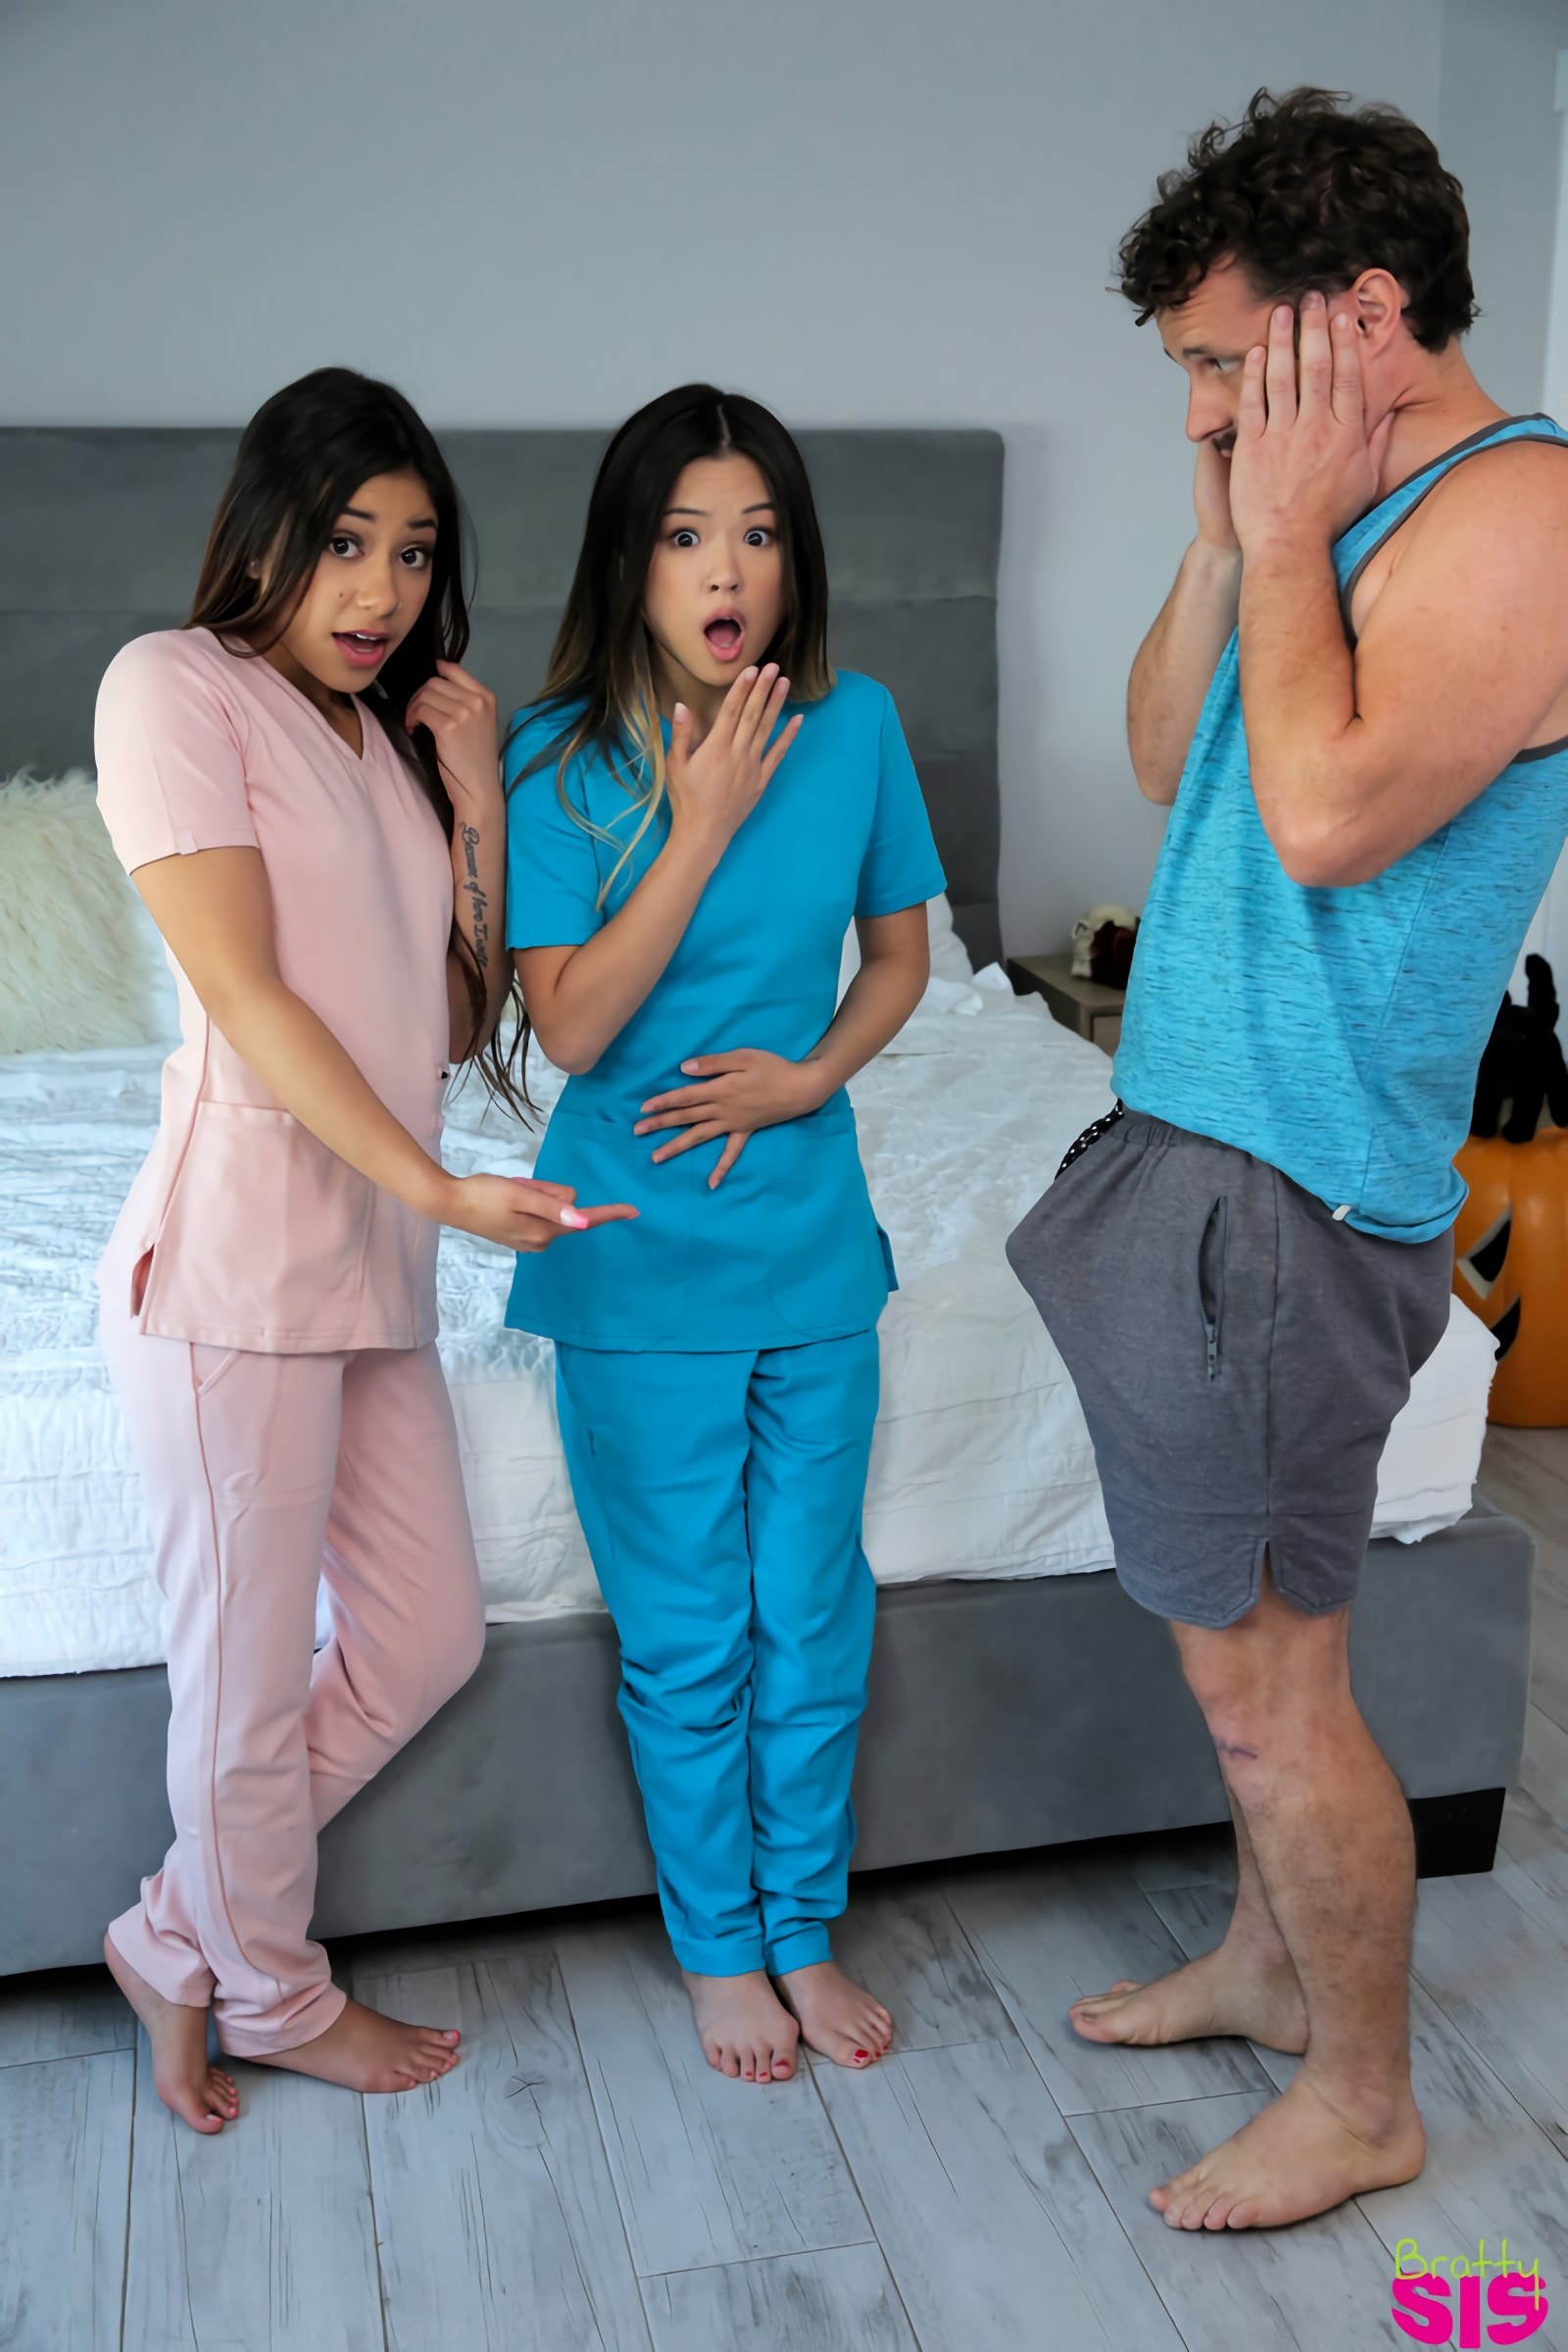 Nubiles 'Dick Appointment For Stepbrother - S20:E5' starring Lulu Chu (Photo 4)